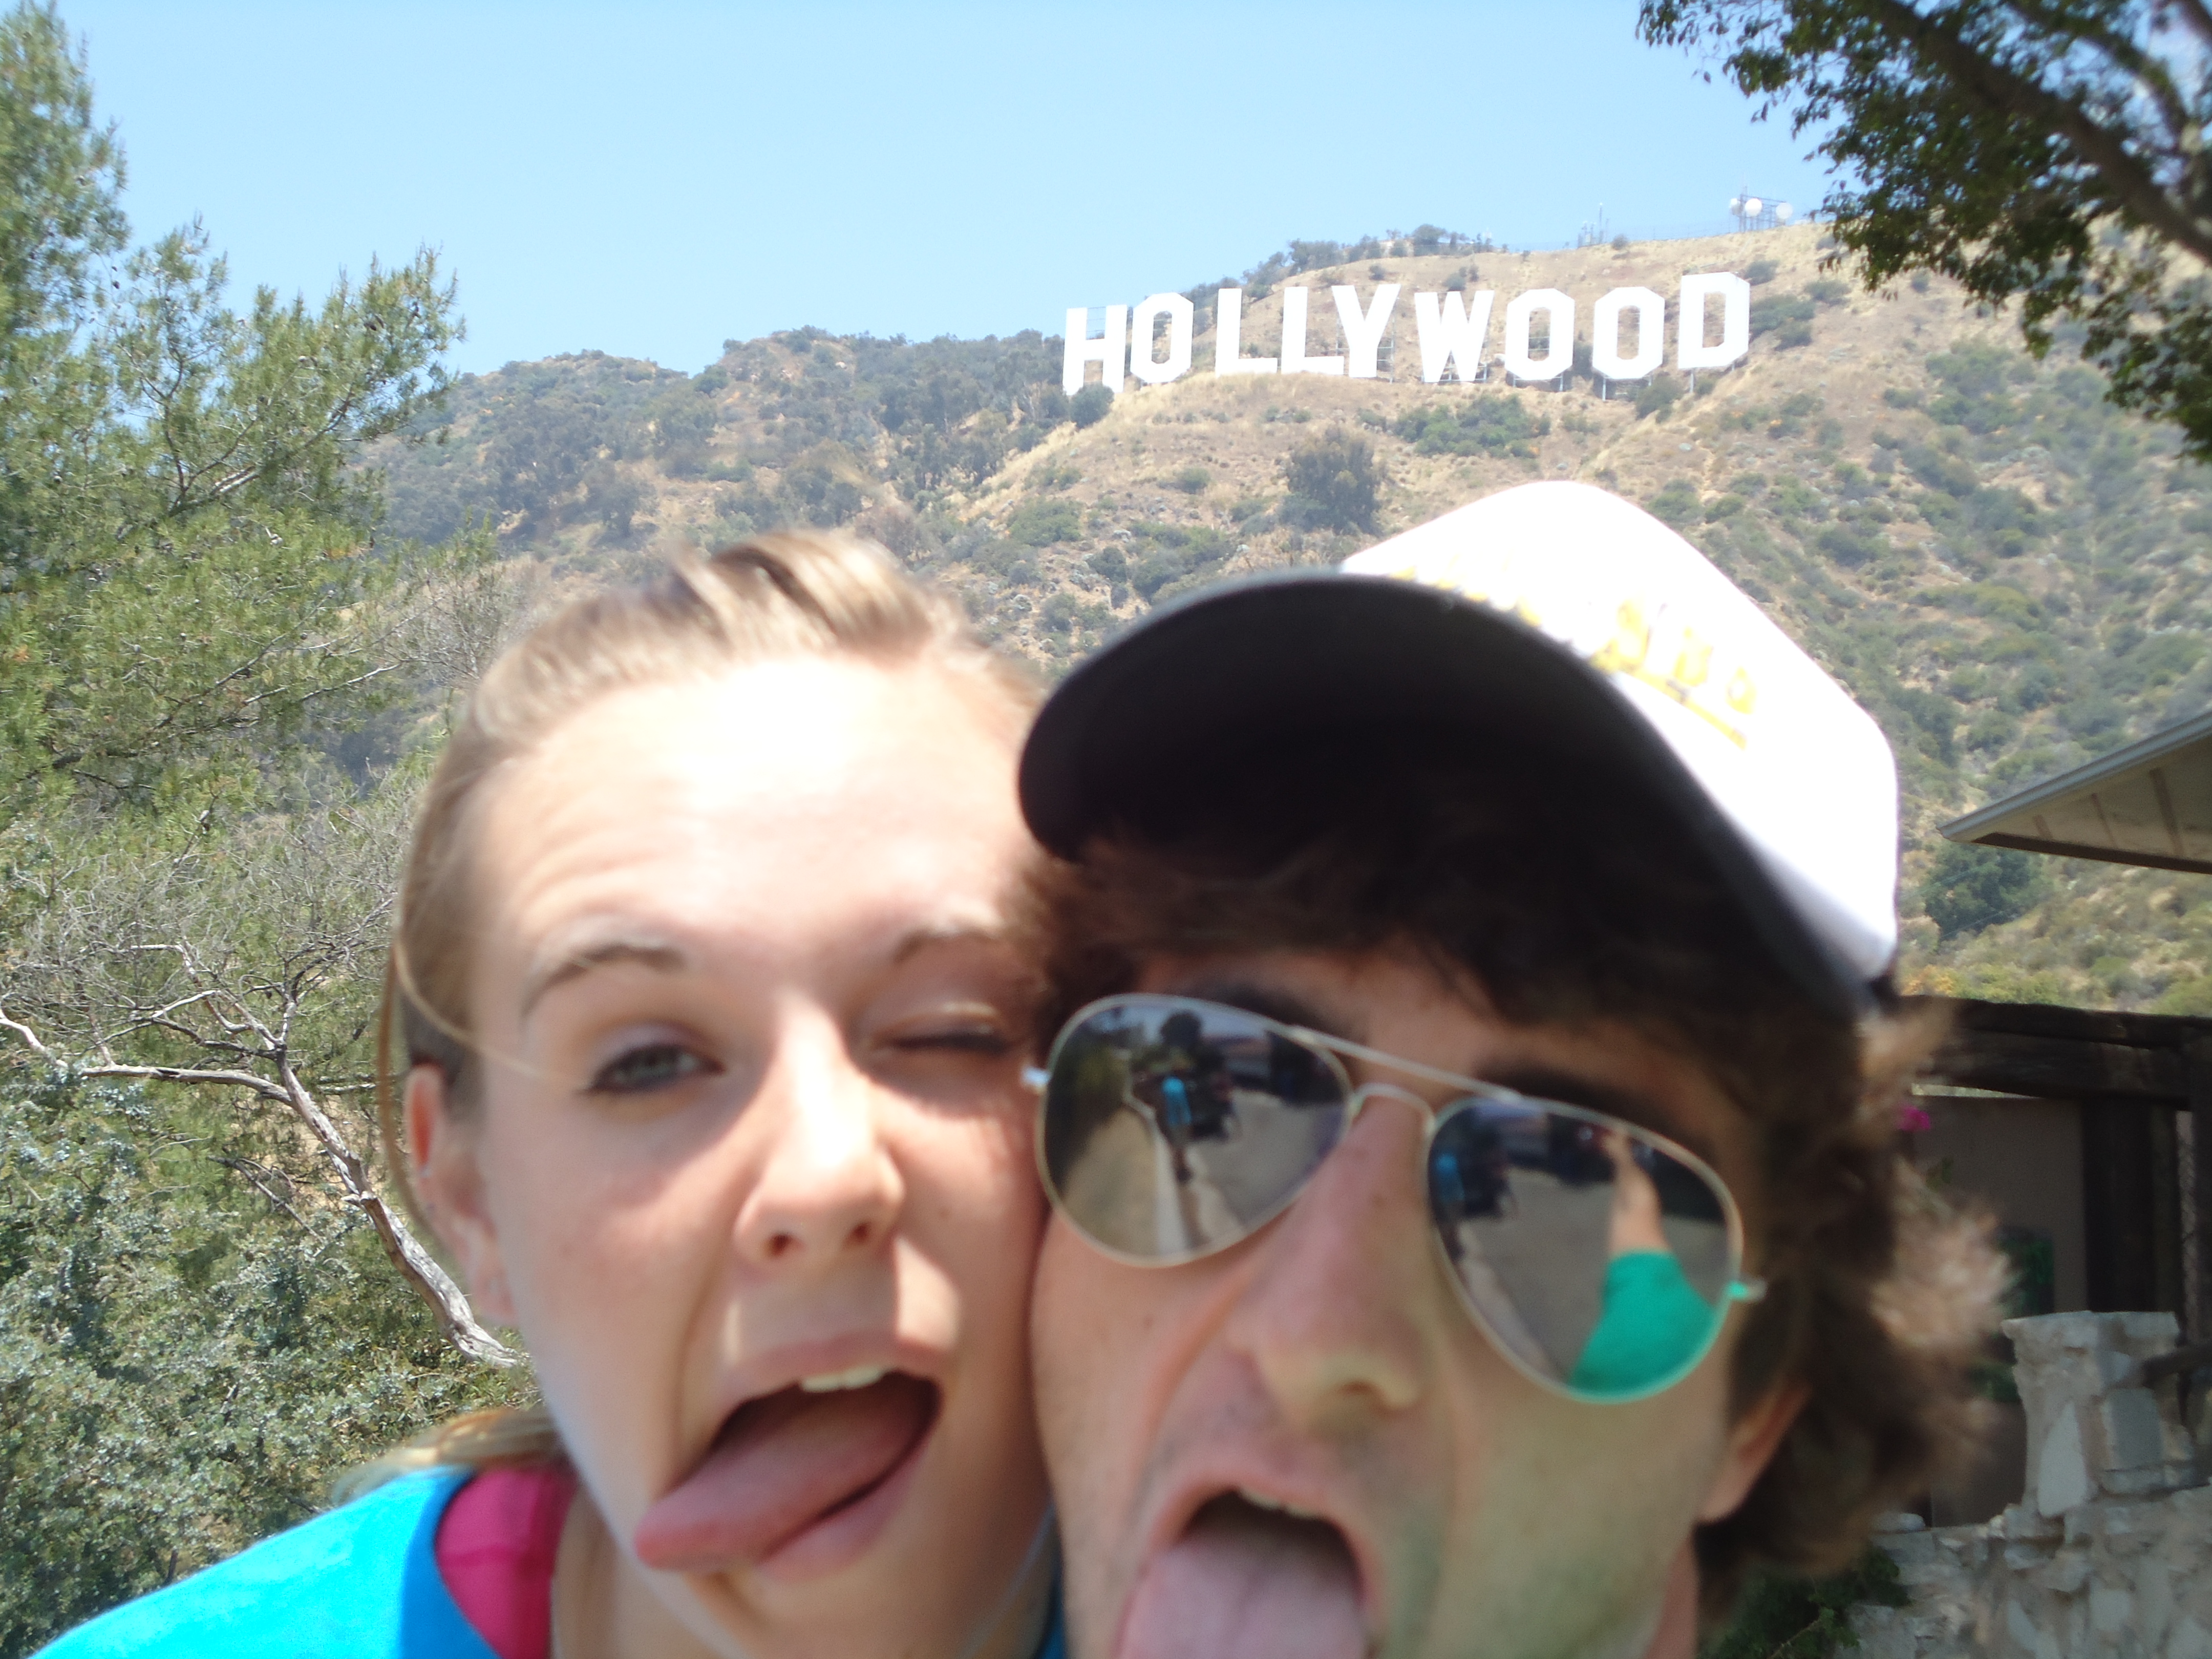 A Cruising Couple, Hollywood, Road Trip